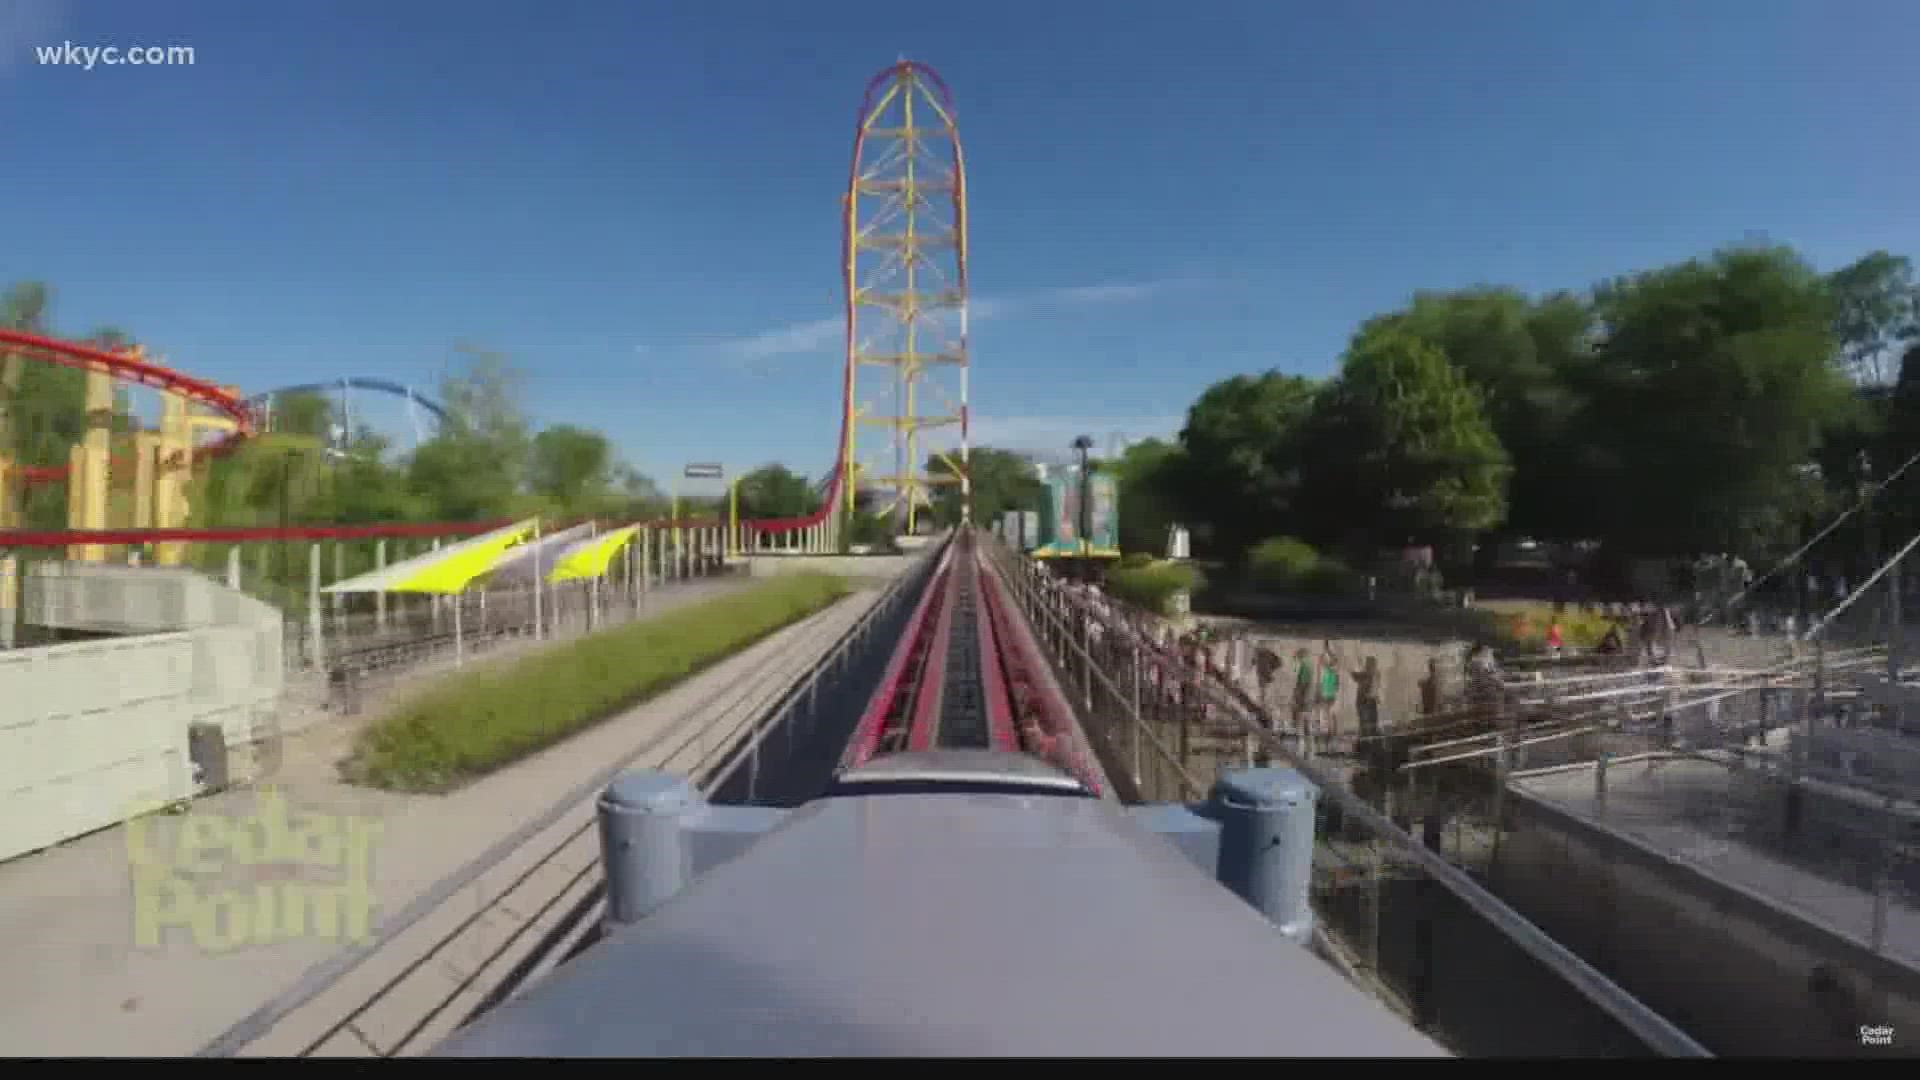 We're learning more about the accident at Cedar Point that sent a woman to the hospital after she was struck in the back of the head by a small metal object.